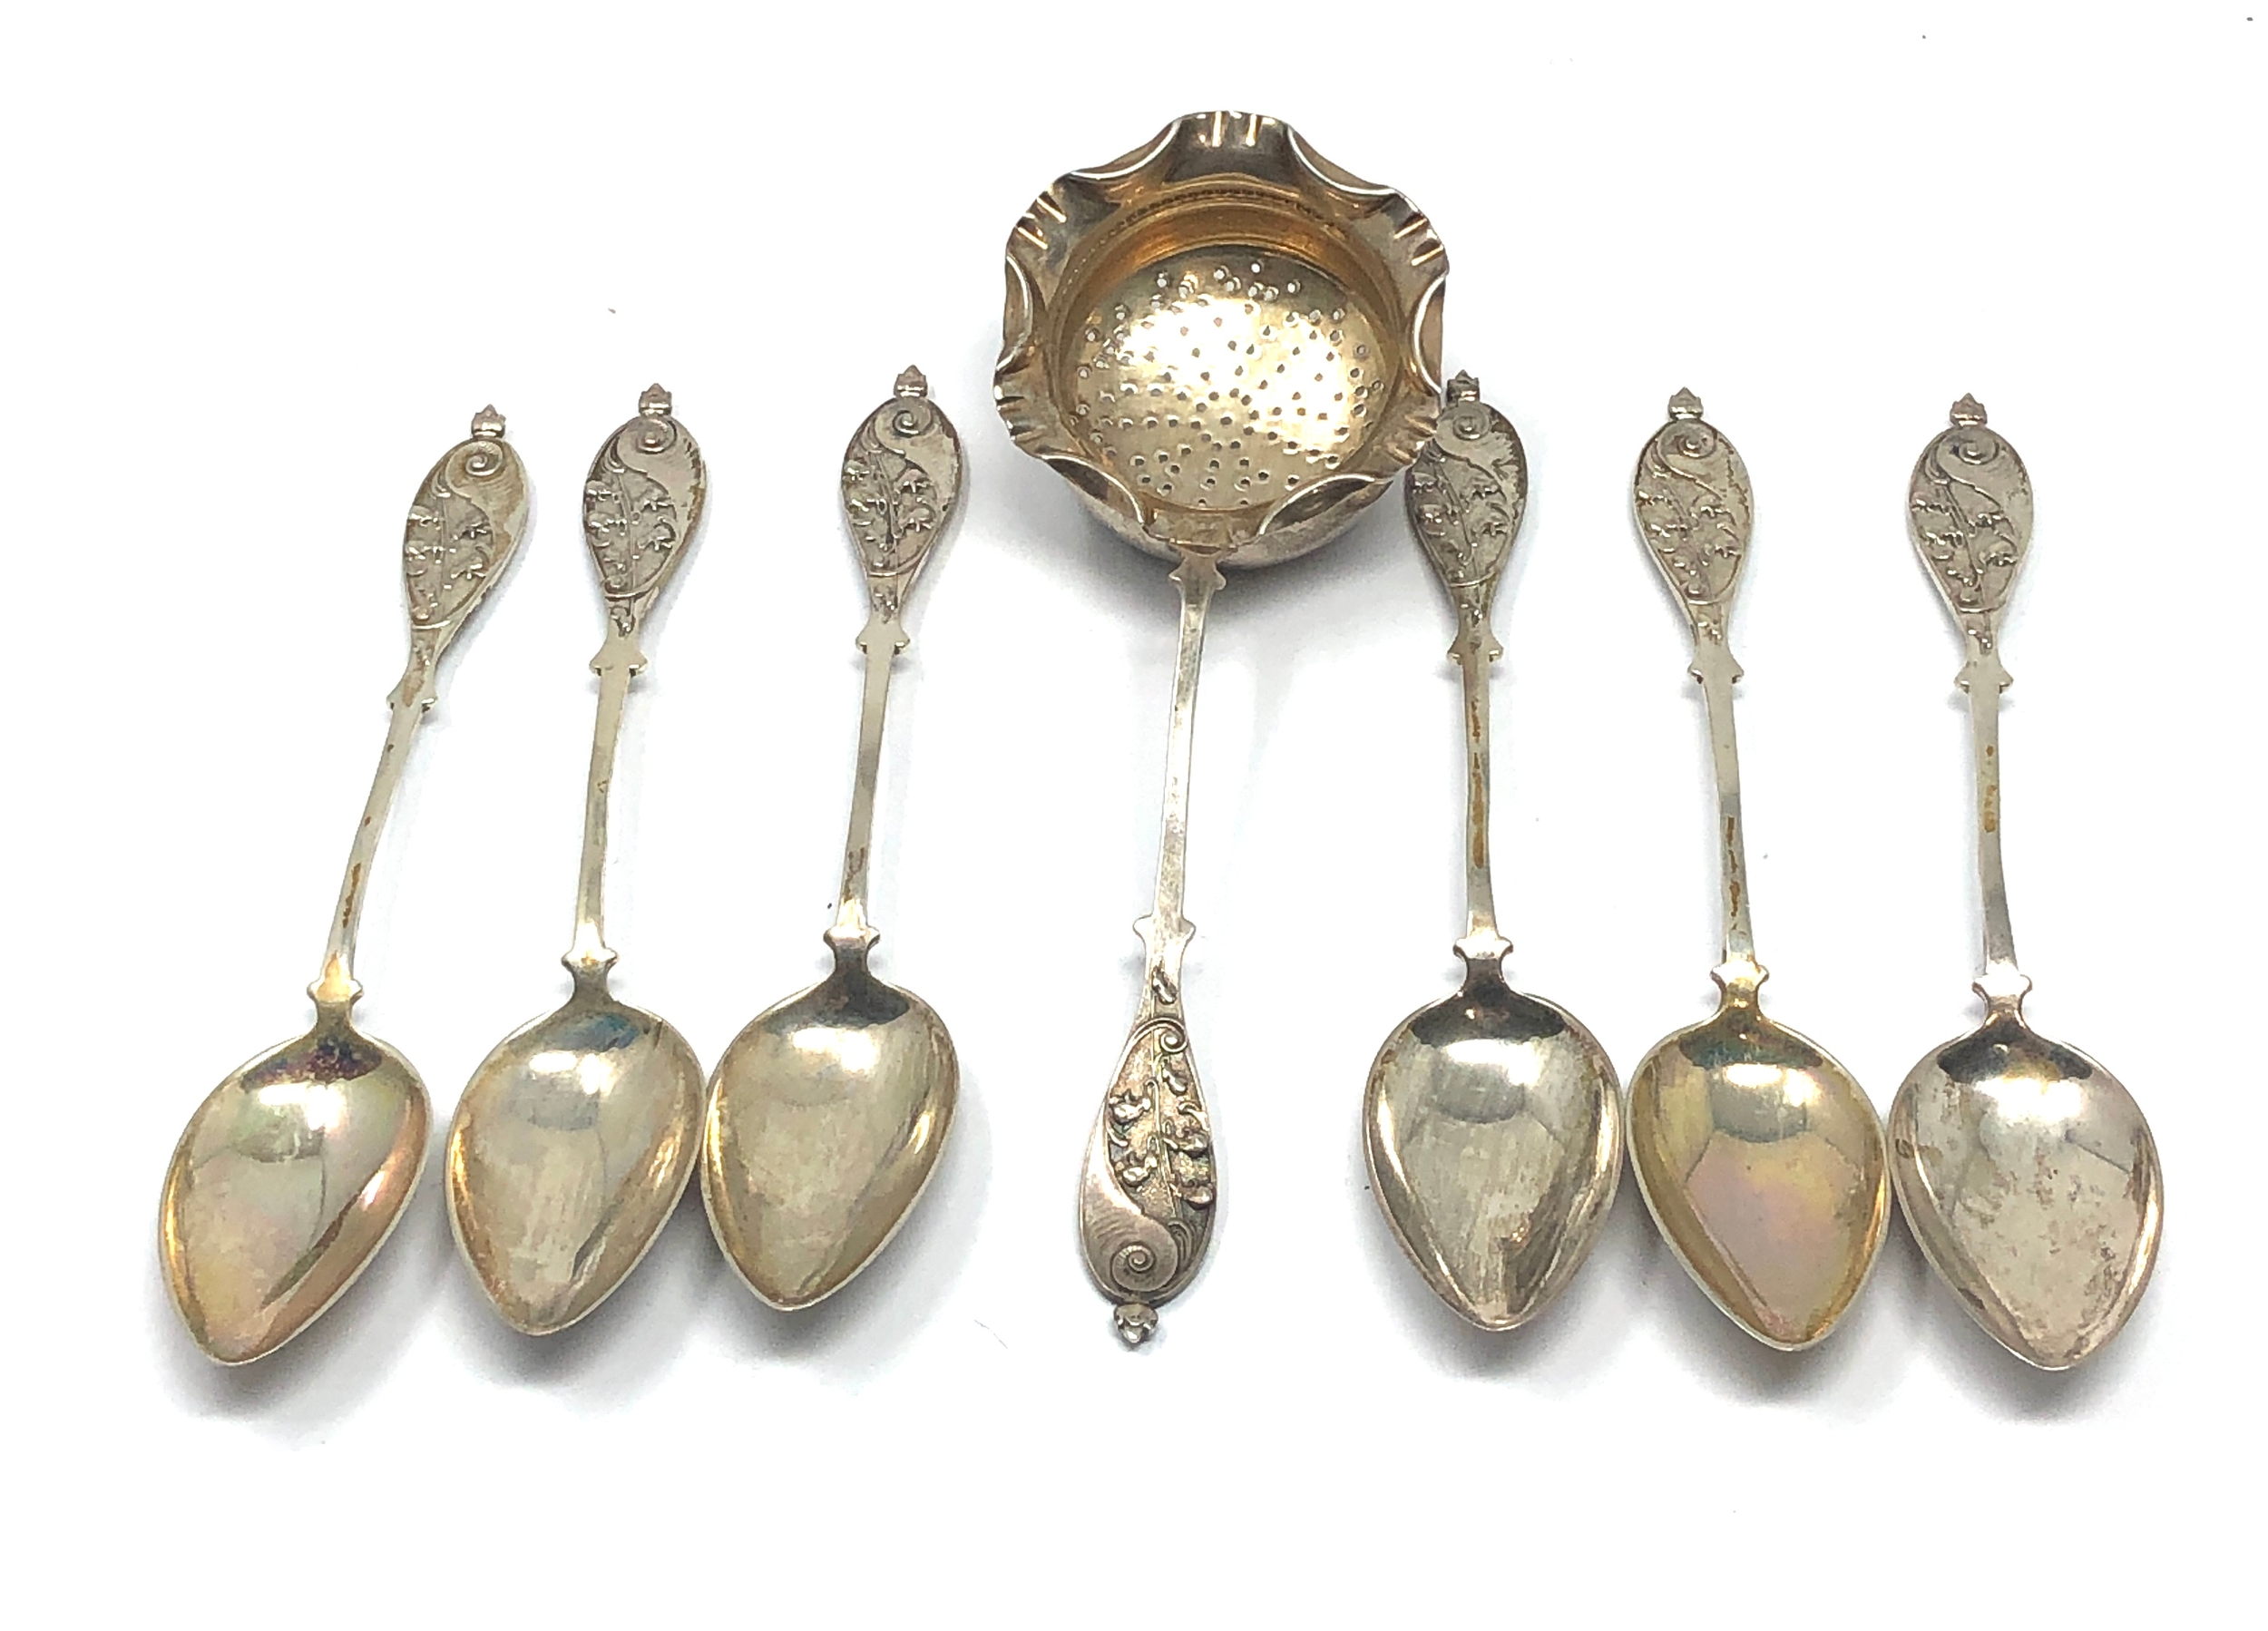 6 antique continental silver tea spoons & strainer